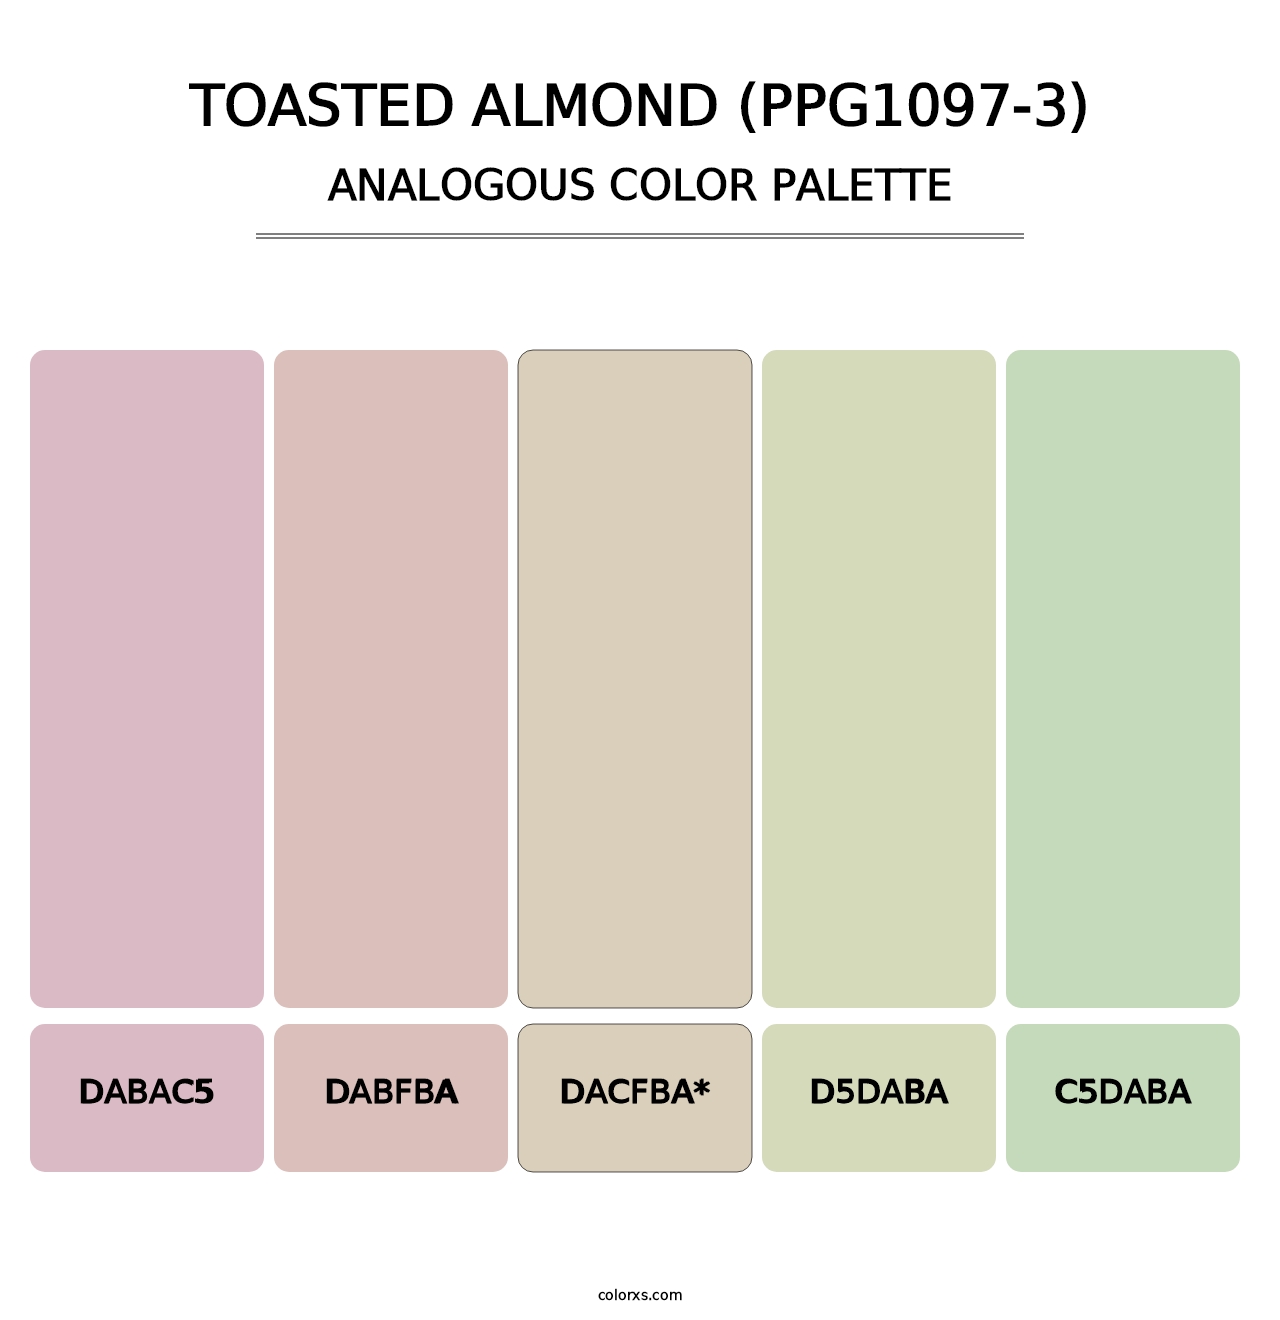 Toasted Almond (PPG1097-3) - Analogous Color Palette